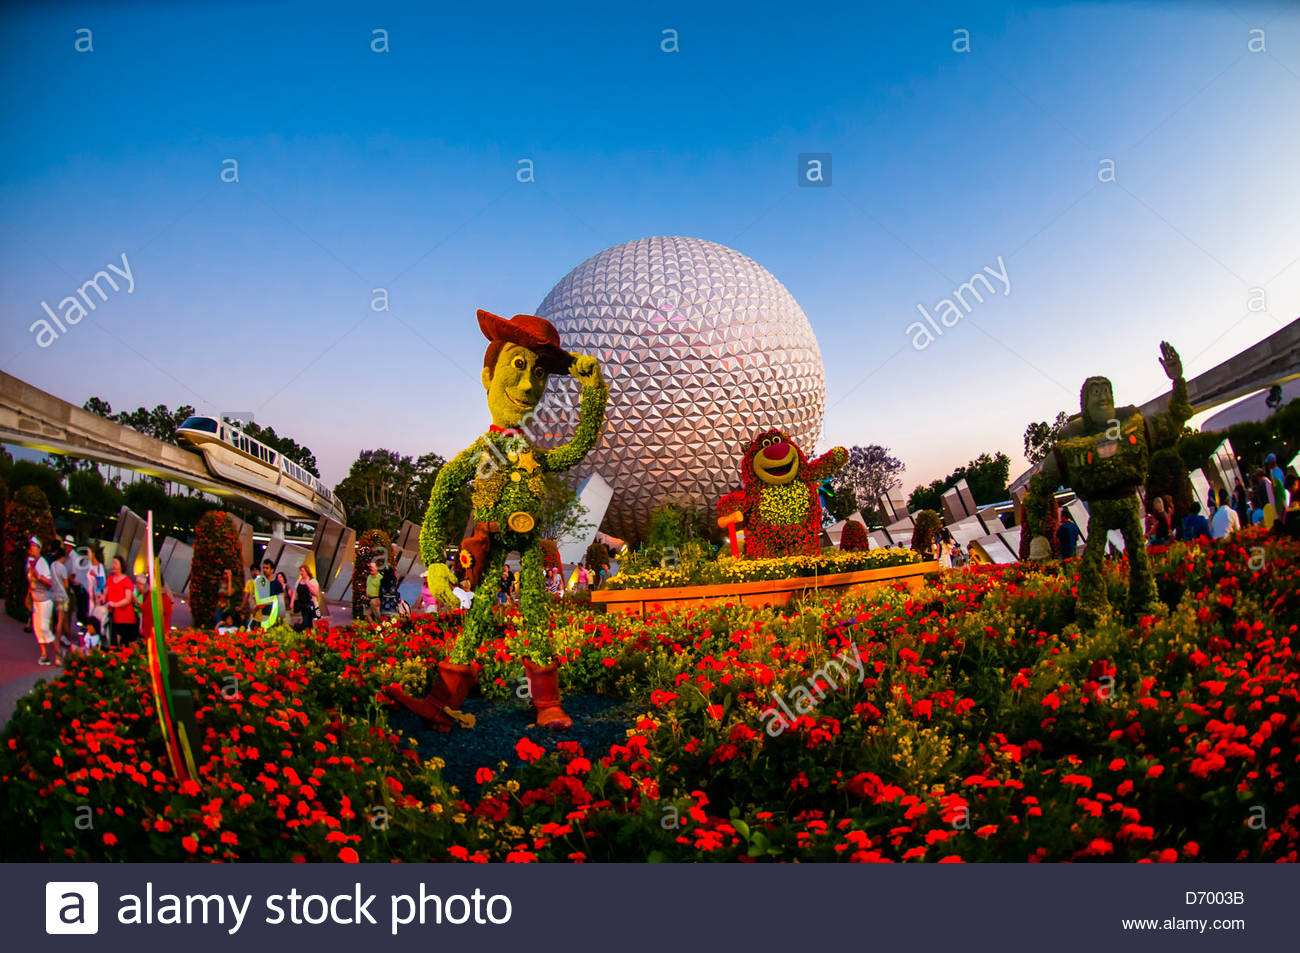 toy story 3 topiary (epcot flower & garden festival), epcot, walt